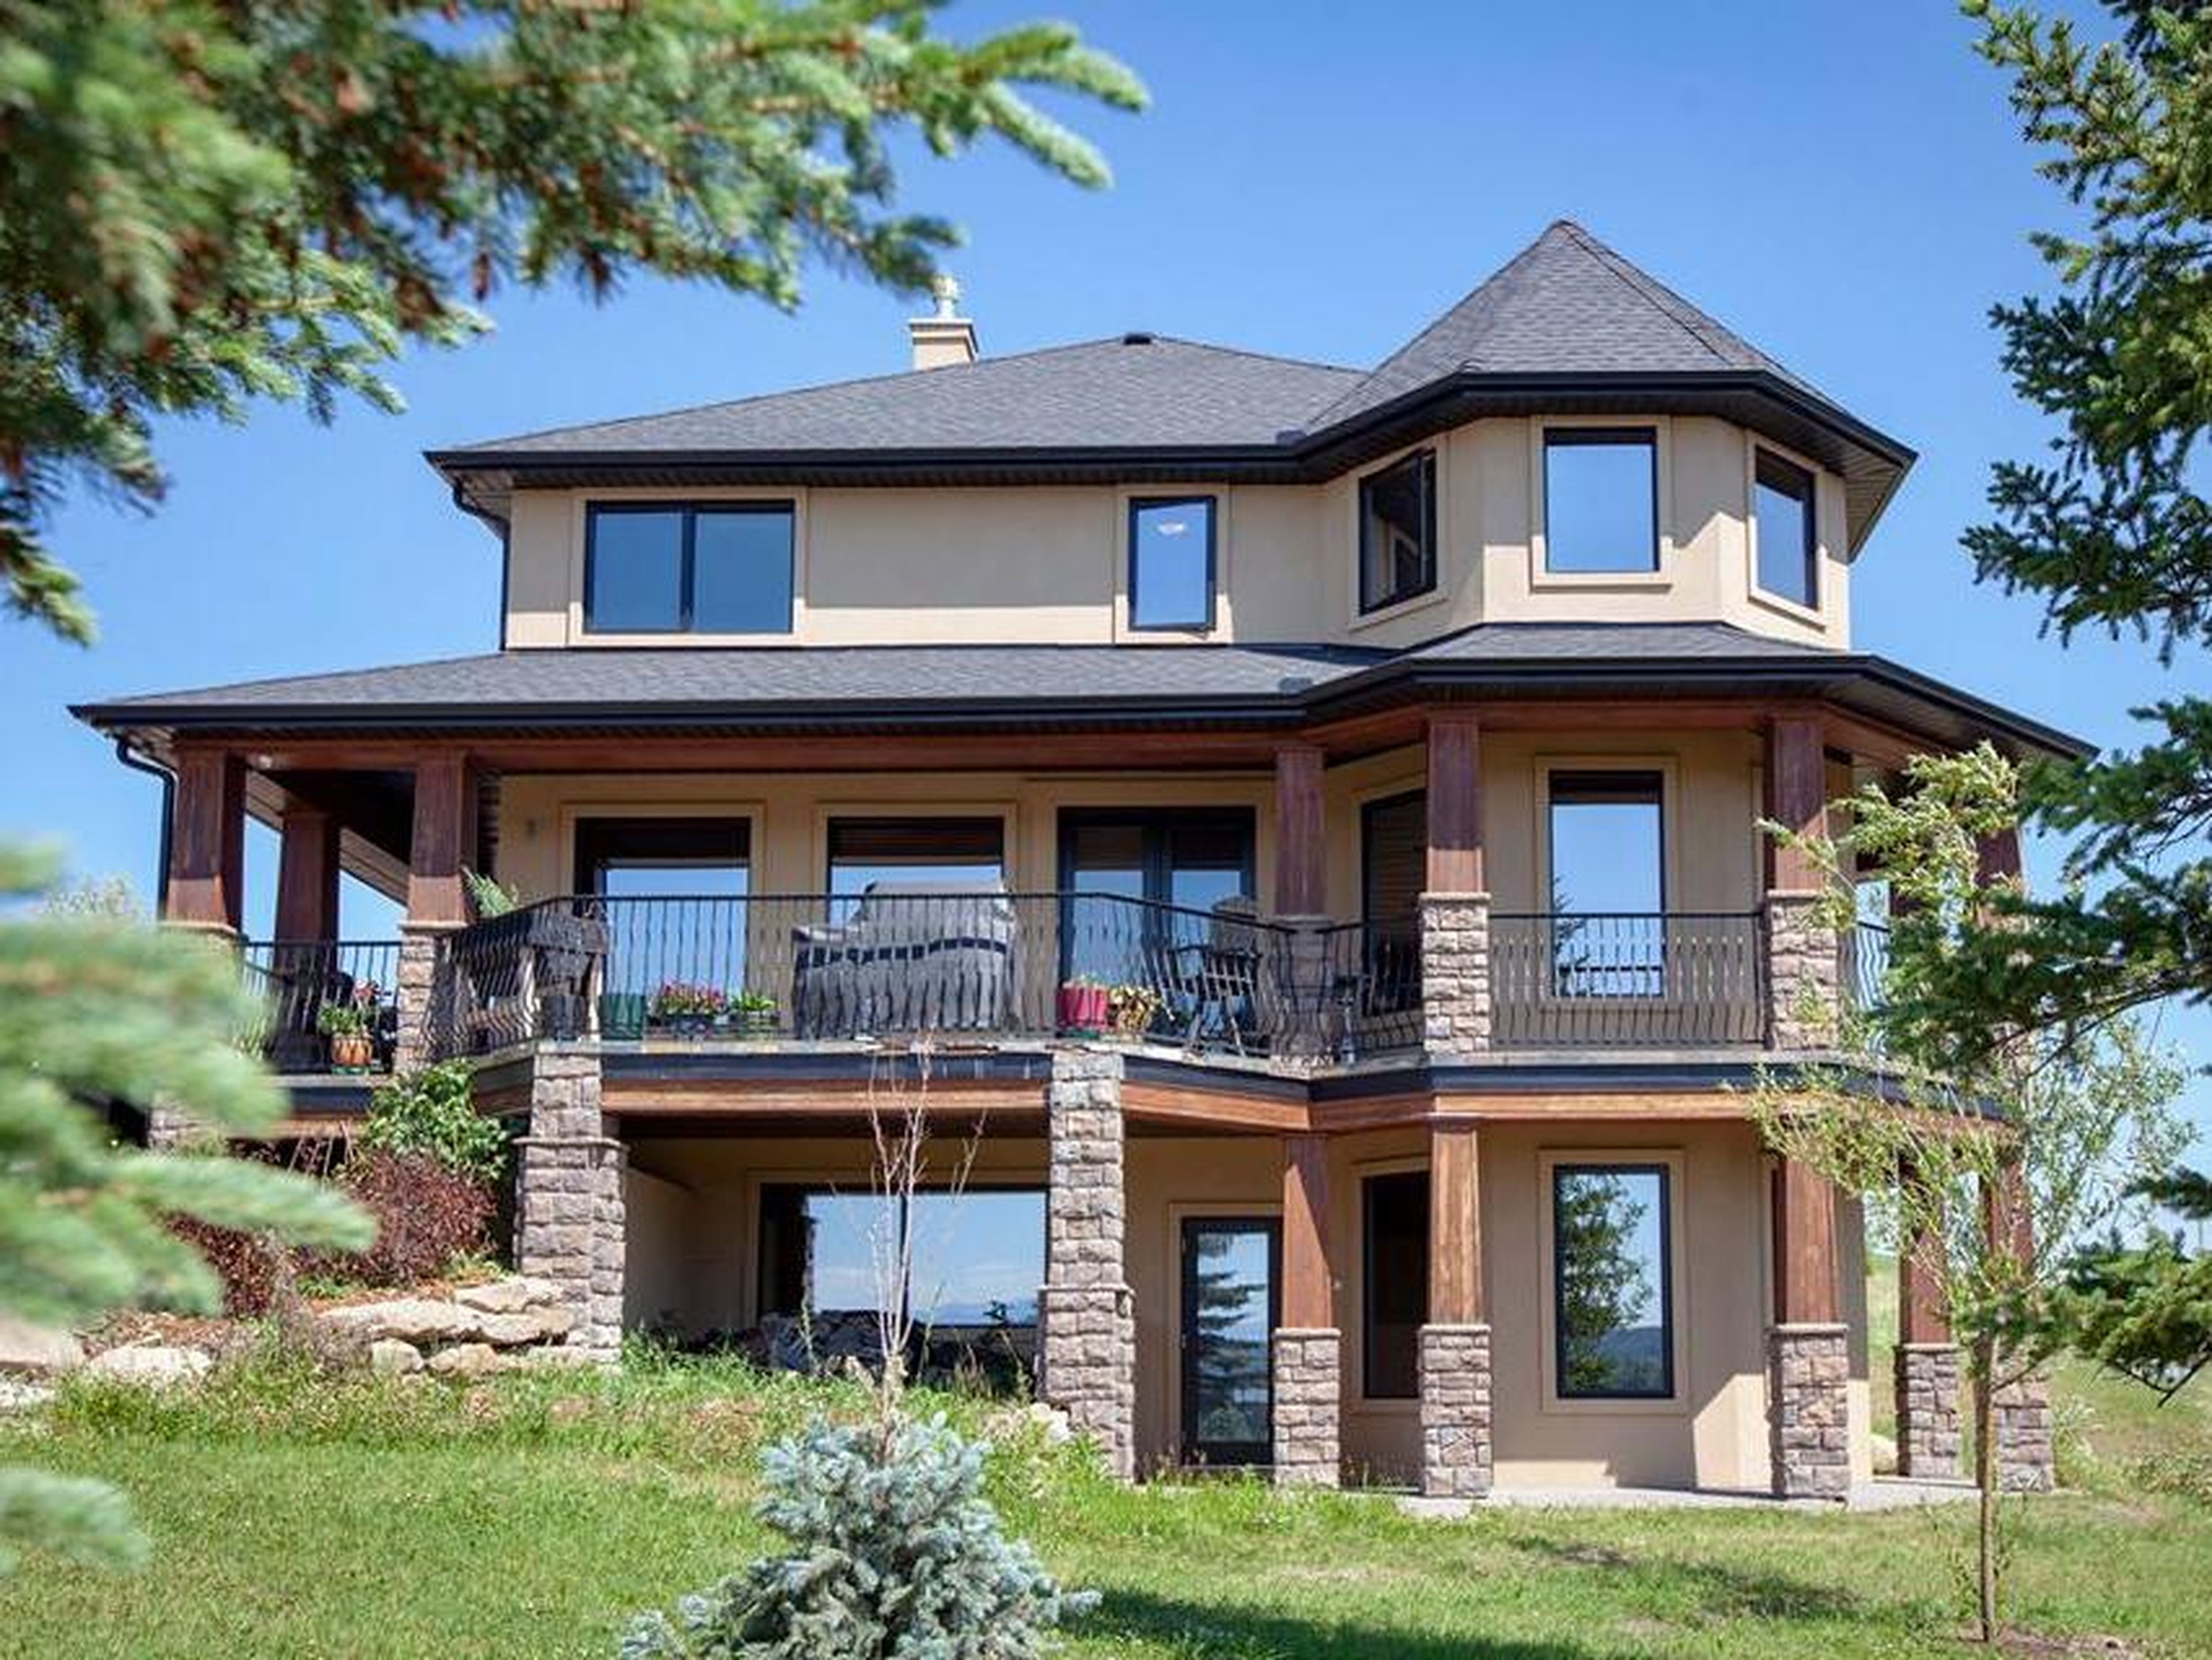 The home is about 40 miles from the city of Calgary.